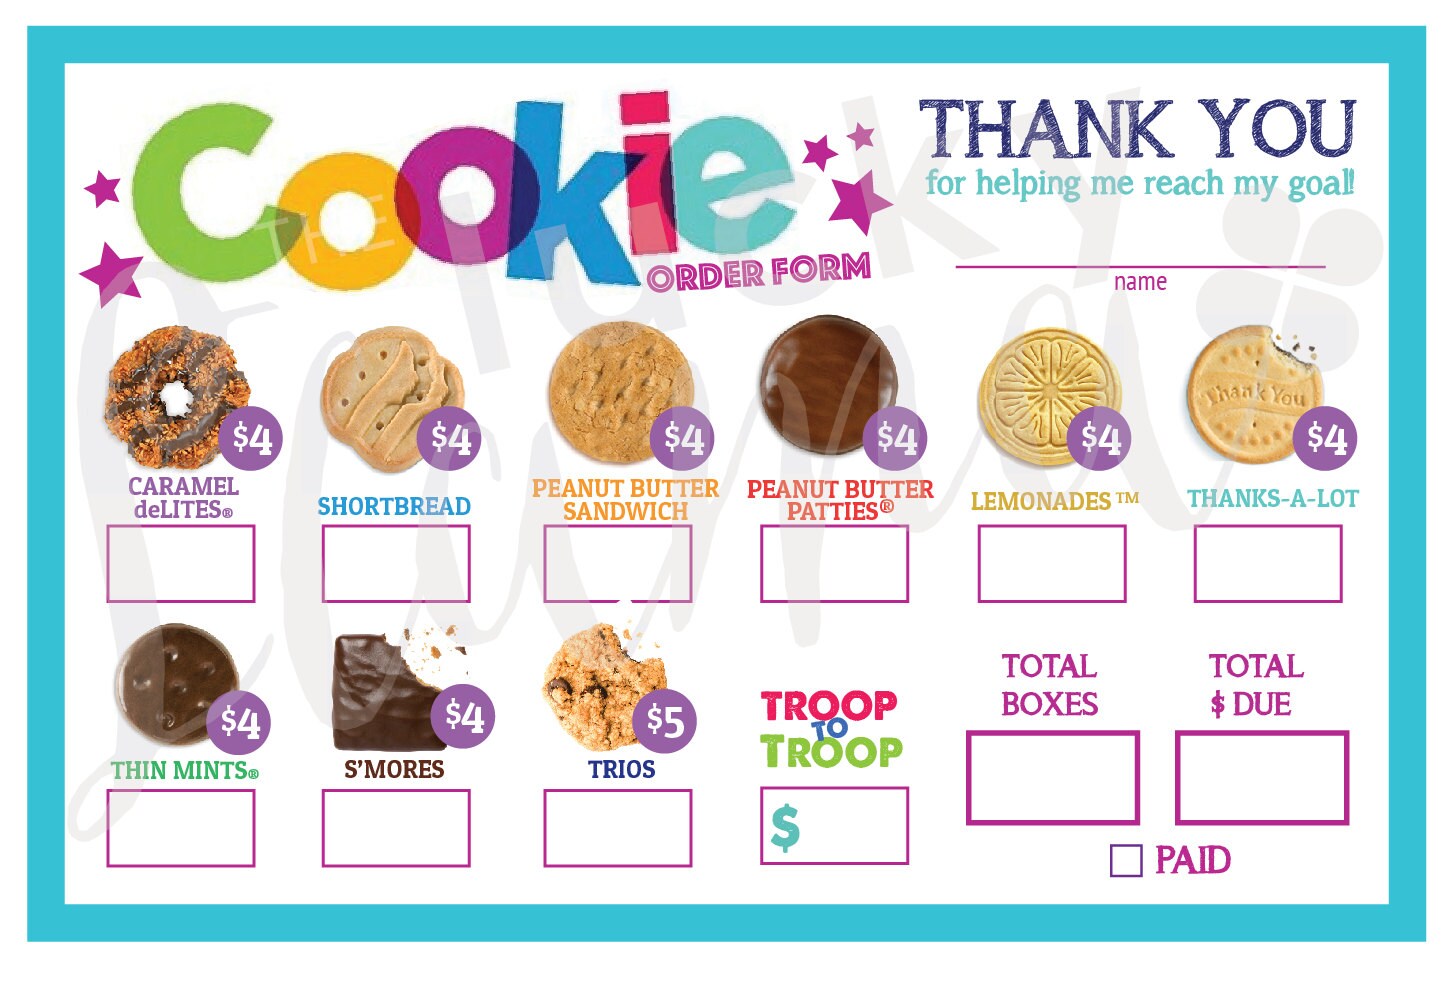 printable-girl-scout-cookie-order-form-printable-forms-free-online